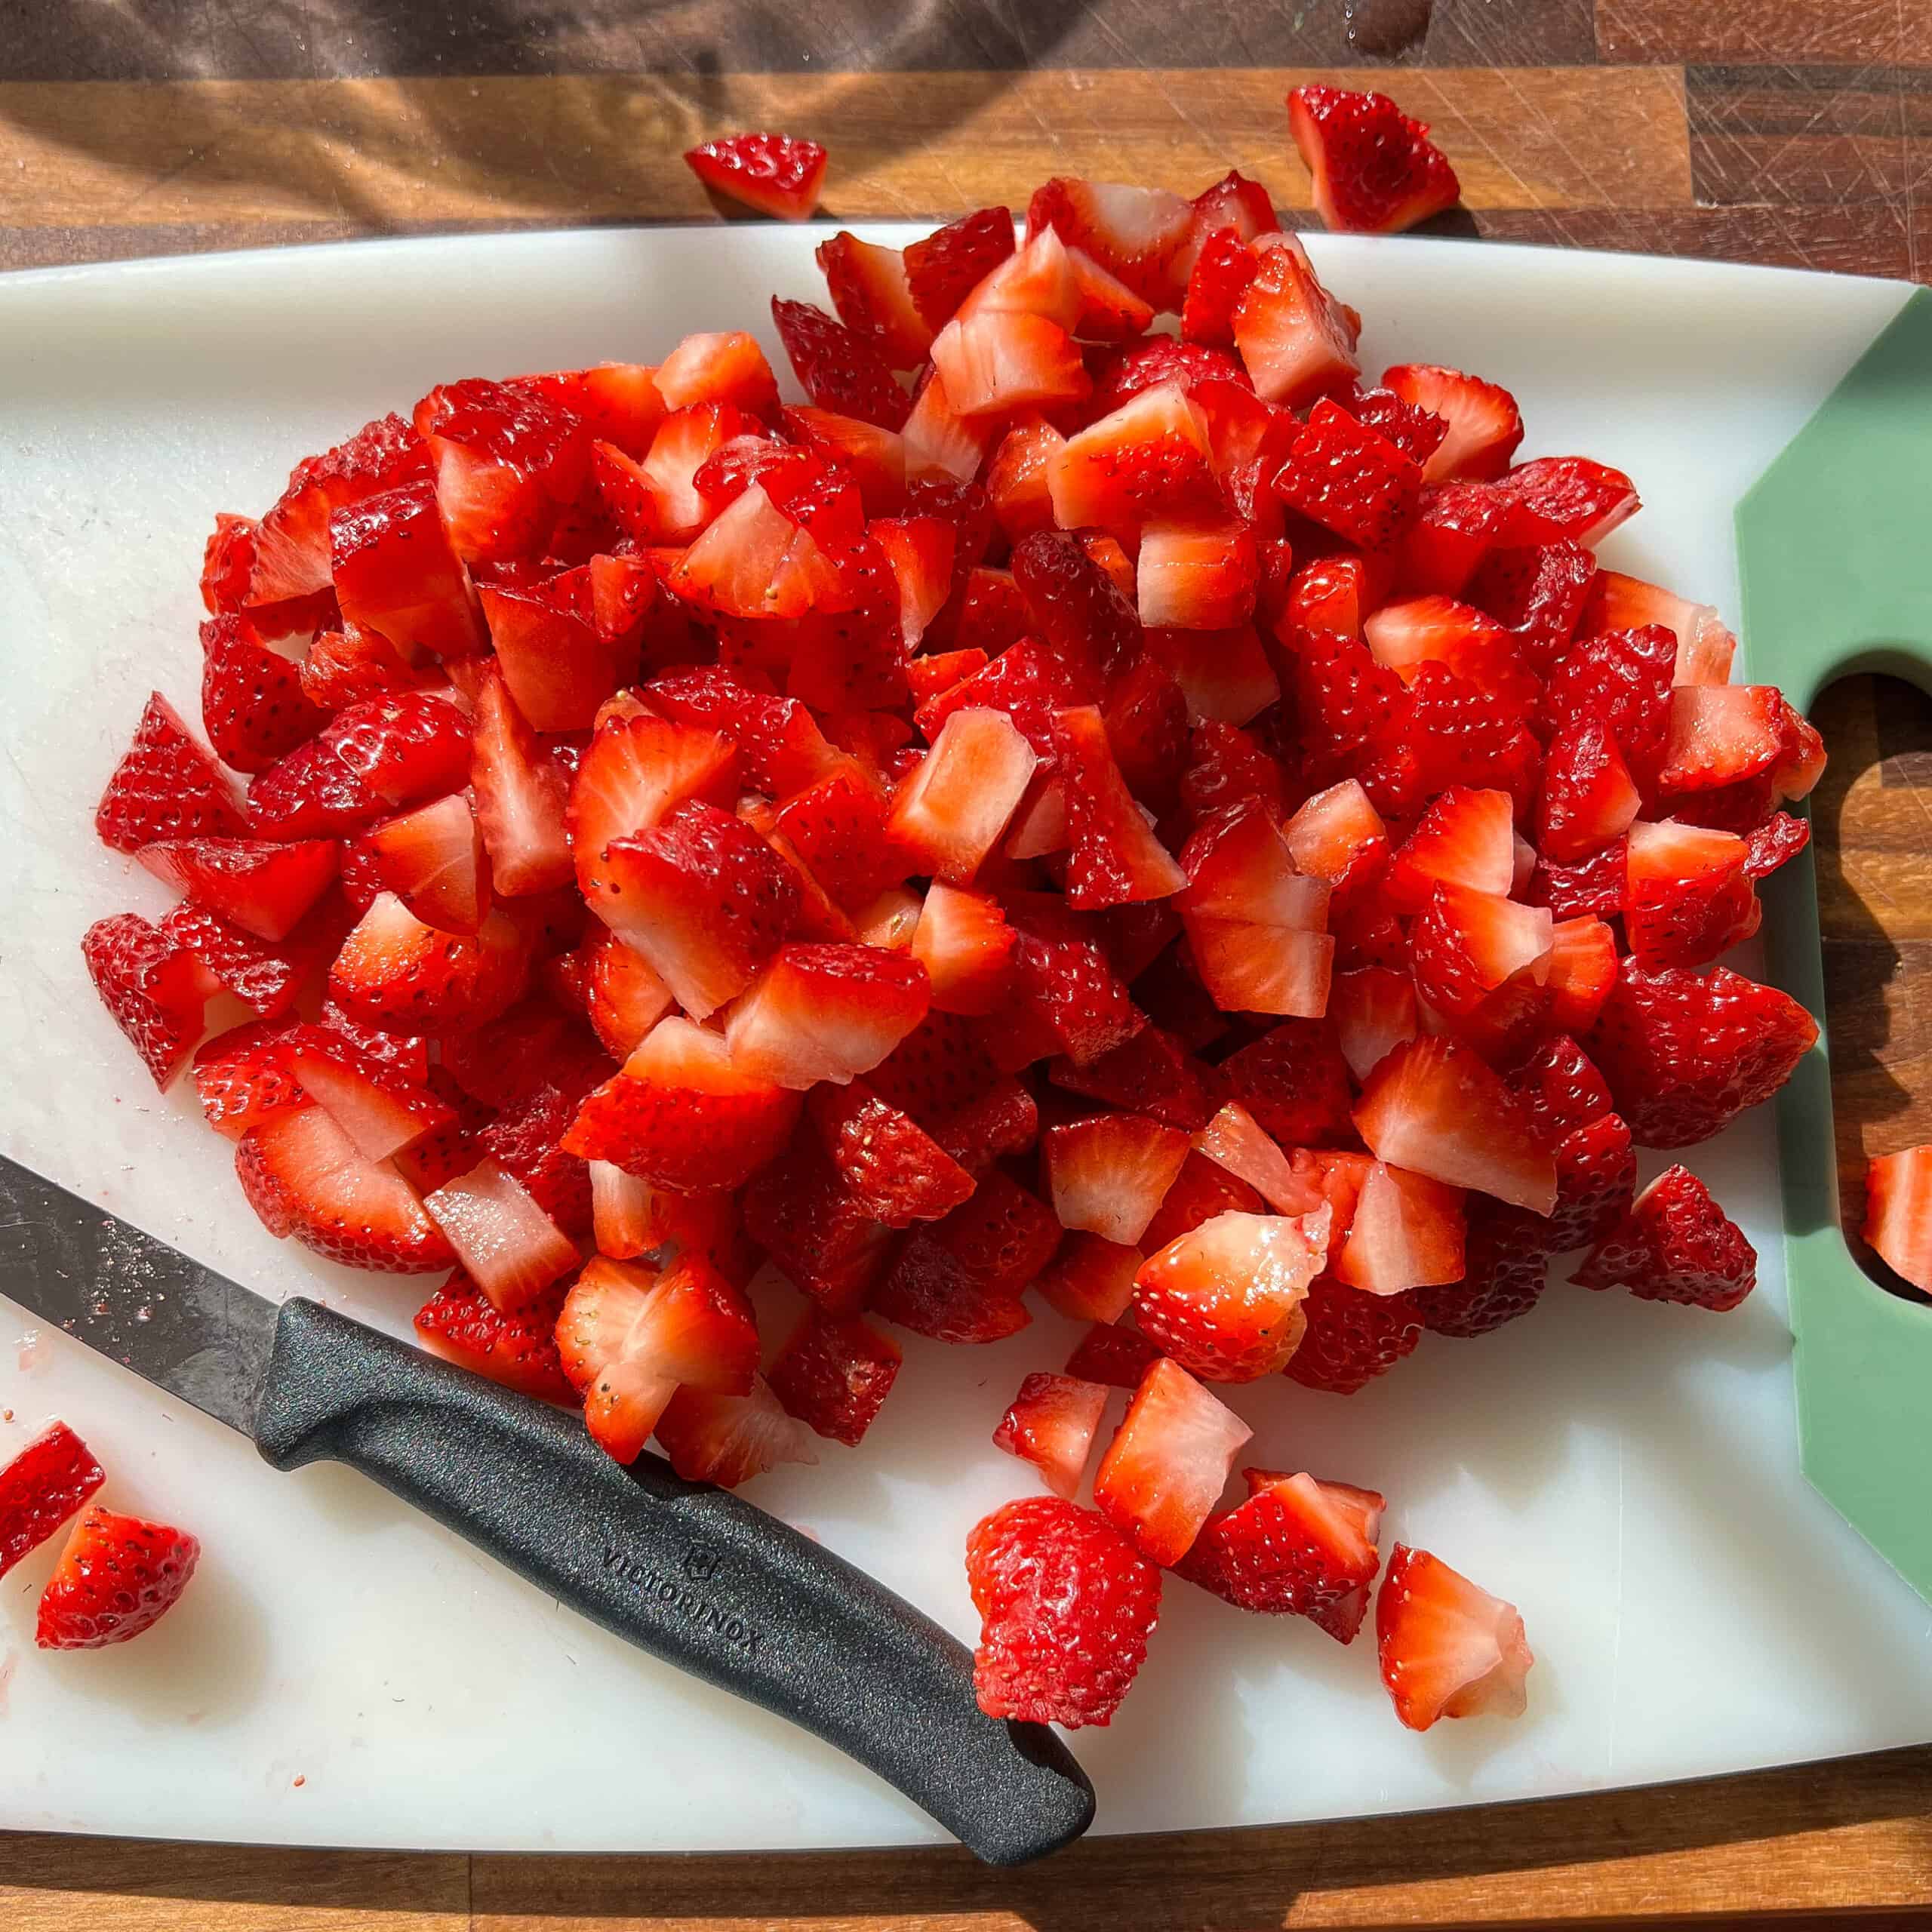 Chopped strawberries on a white cutting board with a pairing knife to the left side.